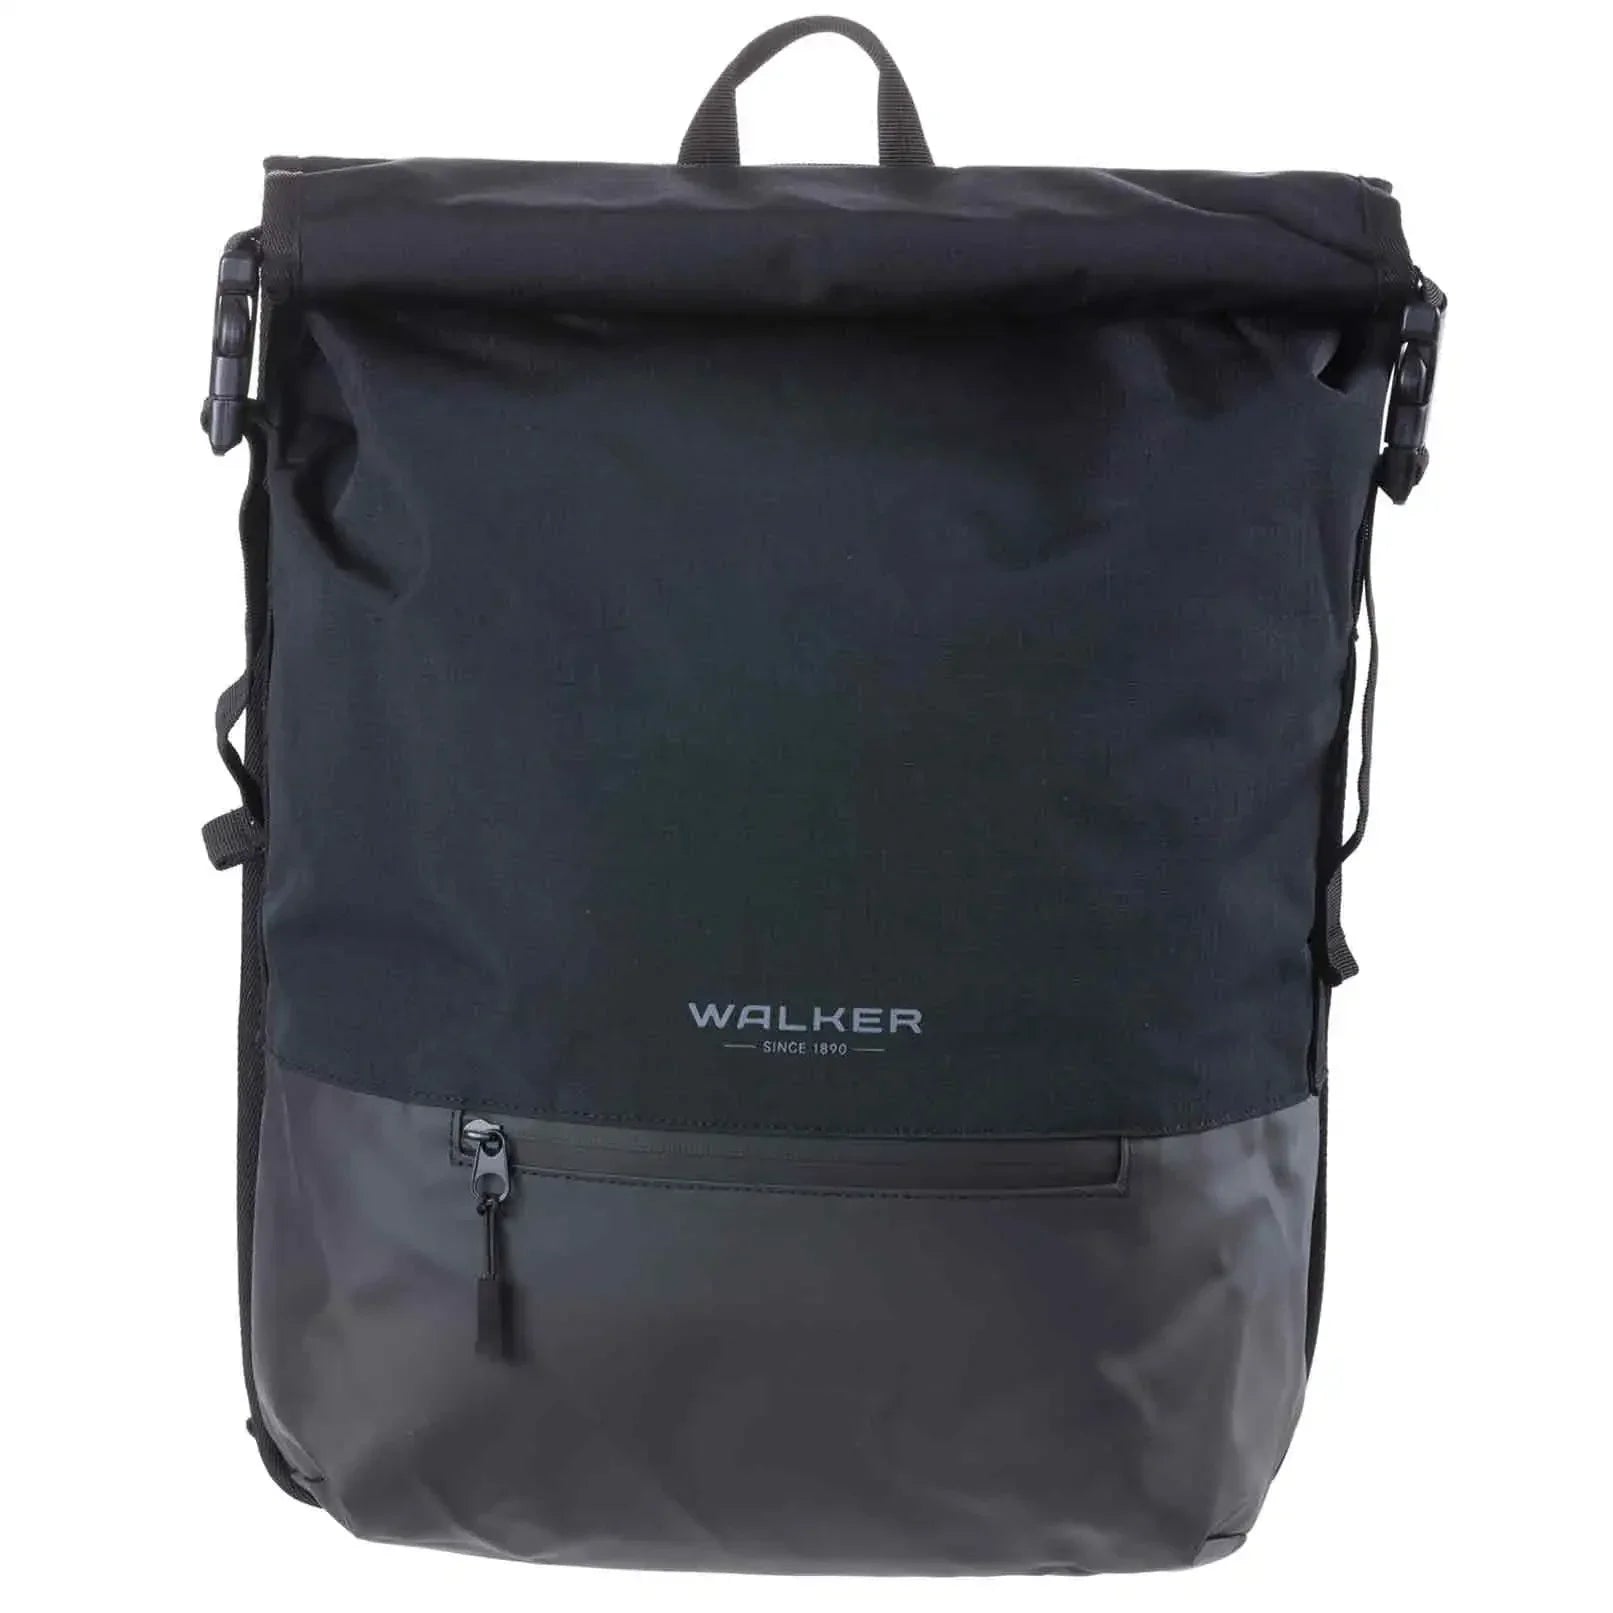 Walker Mika Concept Lifestyle Backpack 44 cm - Anthracite